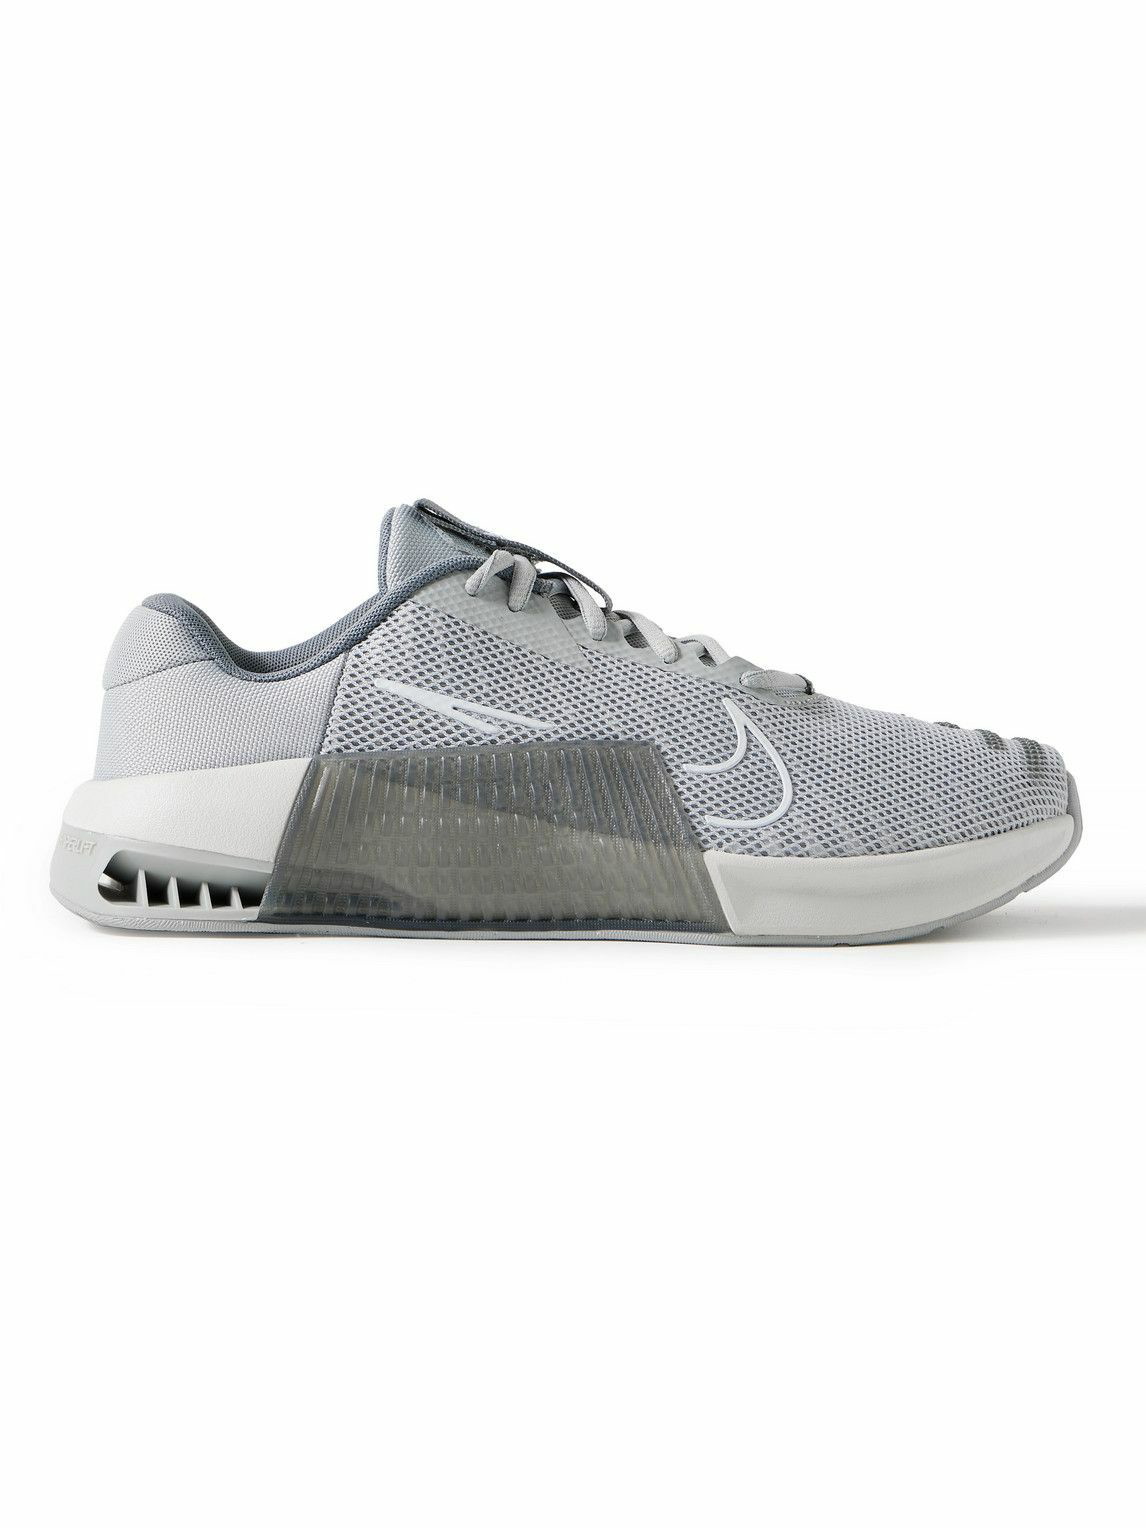 NIKE Metcon 9 rubber-trimmed mesh sneakers